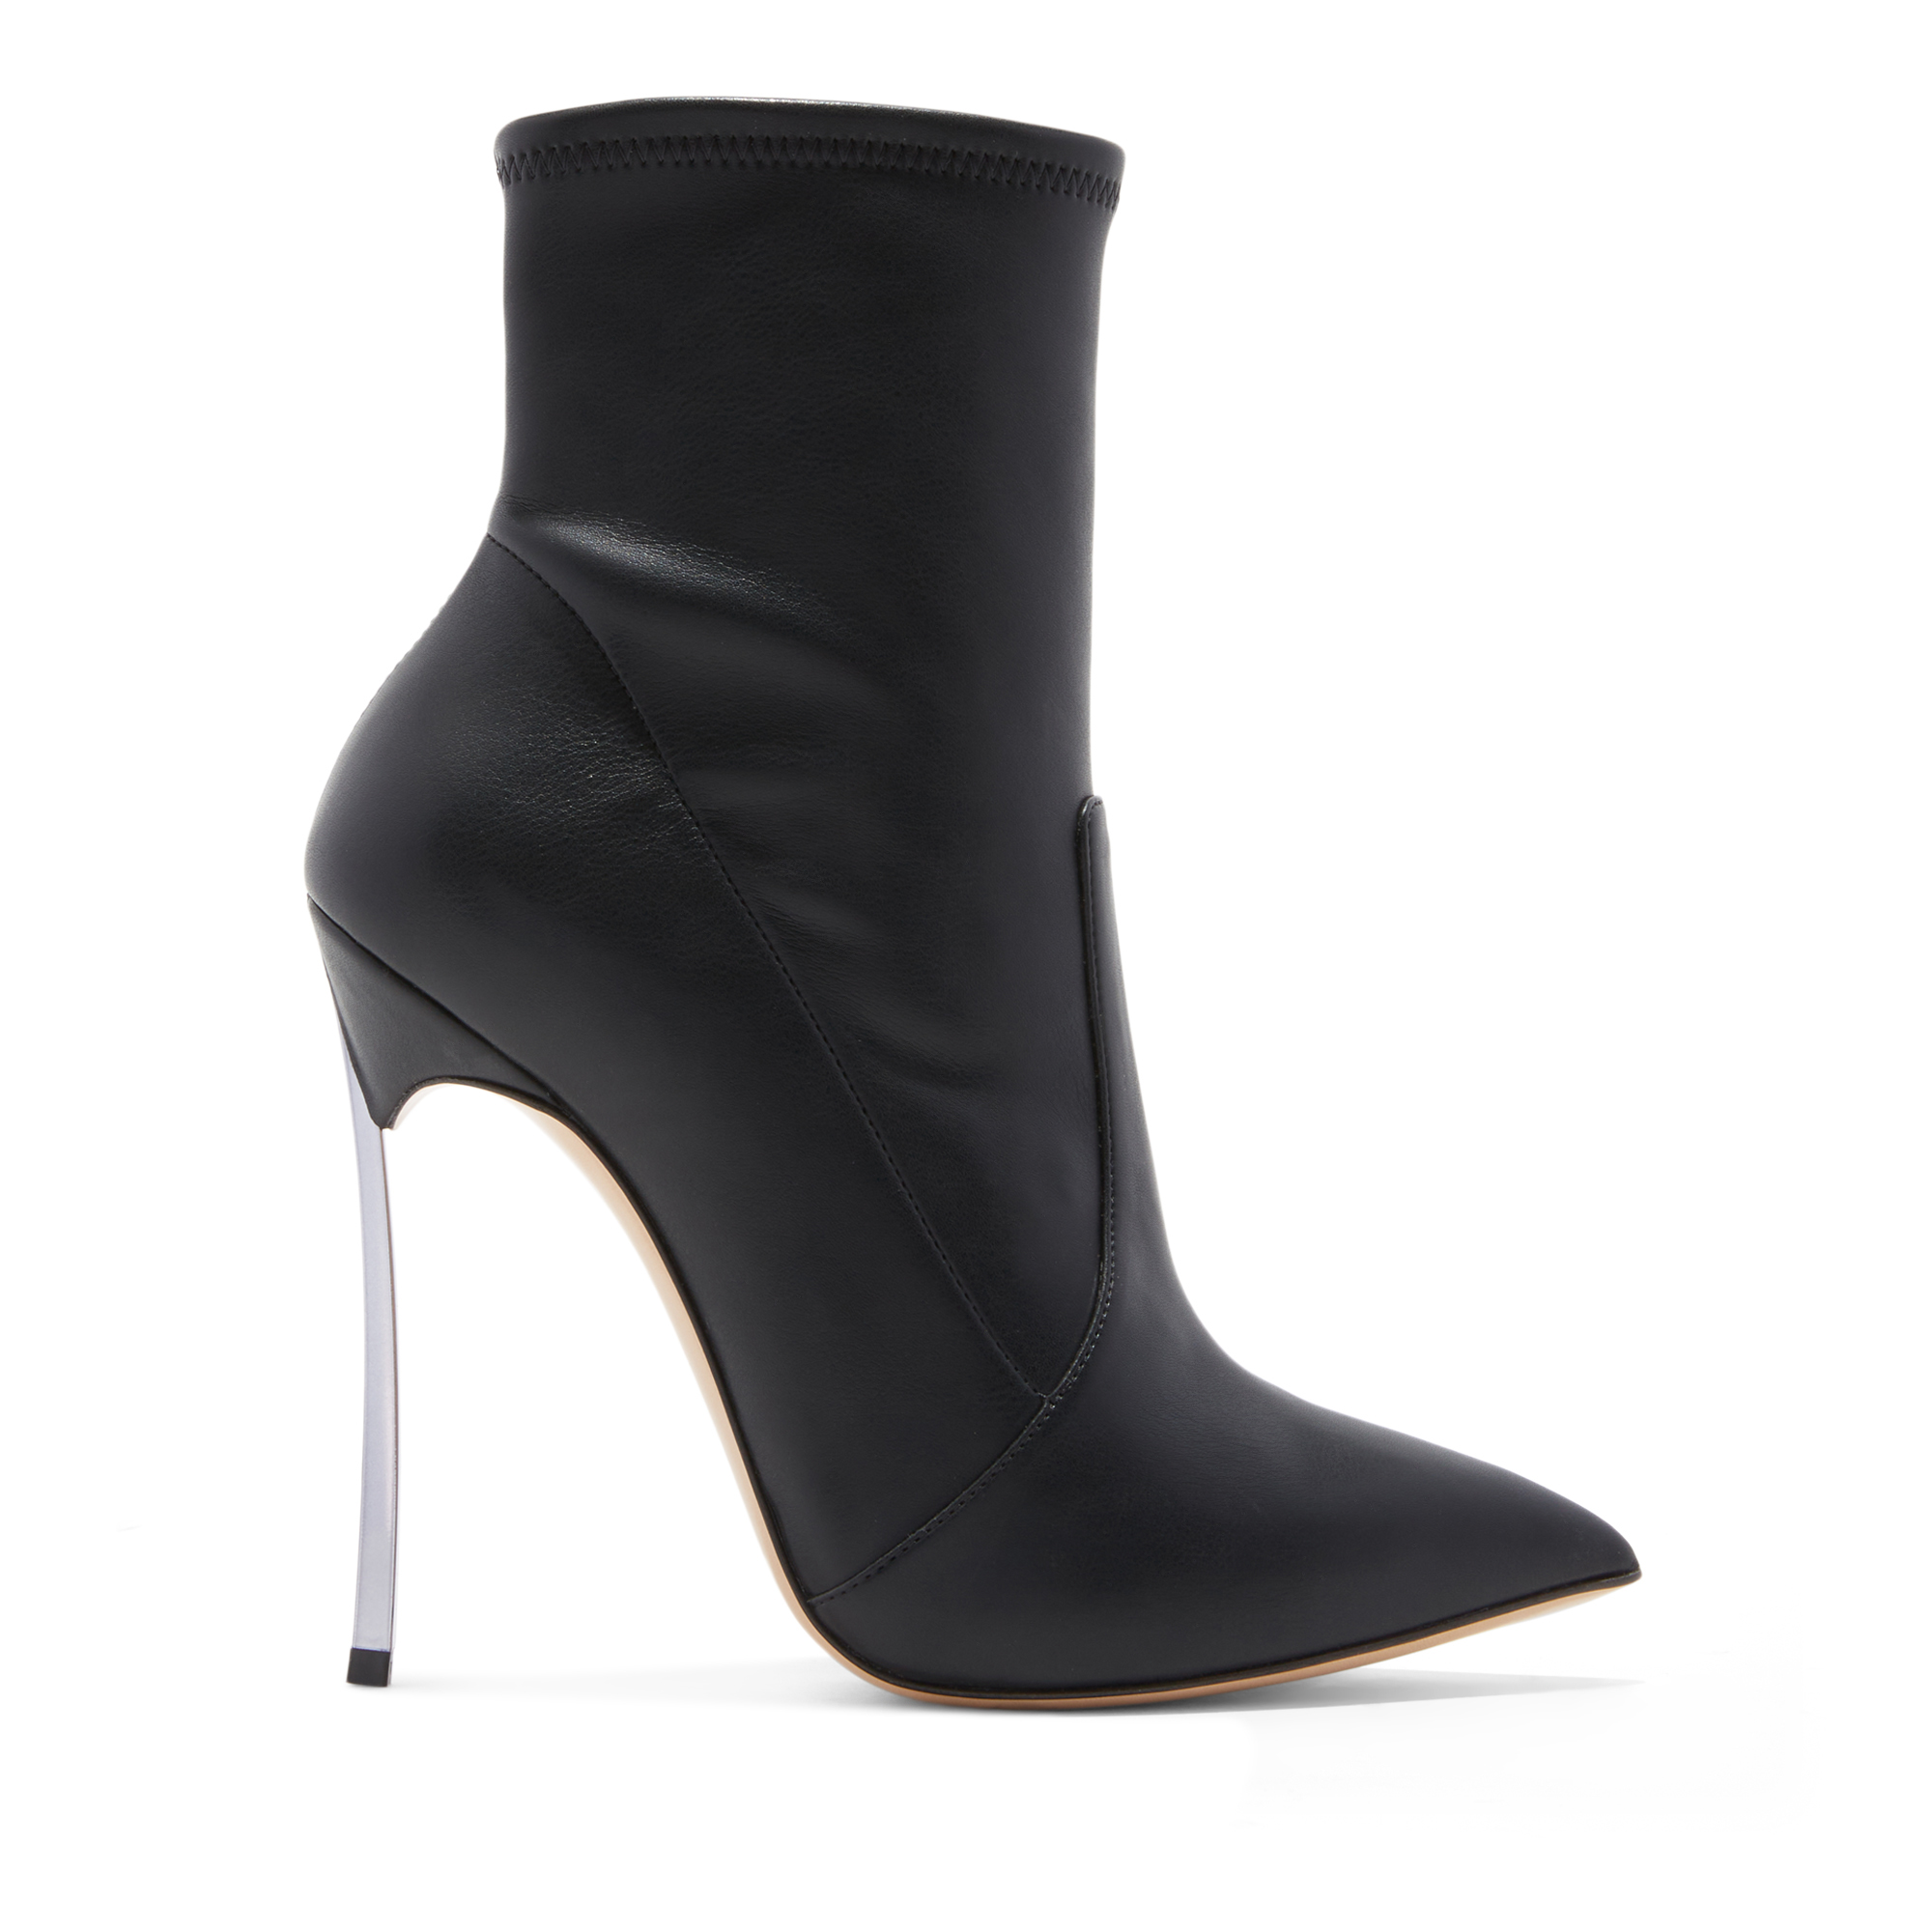 Casadei Blade Eco Leather - Woman Ankle Boots Black 38